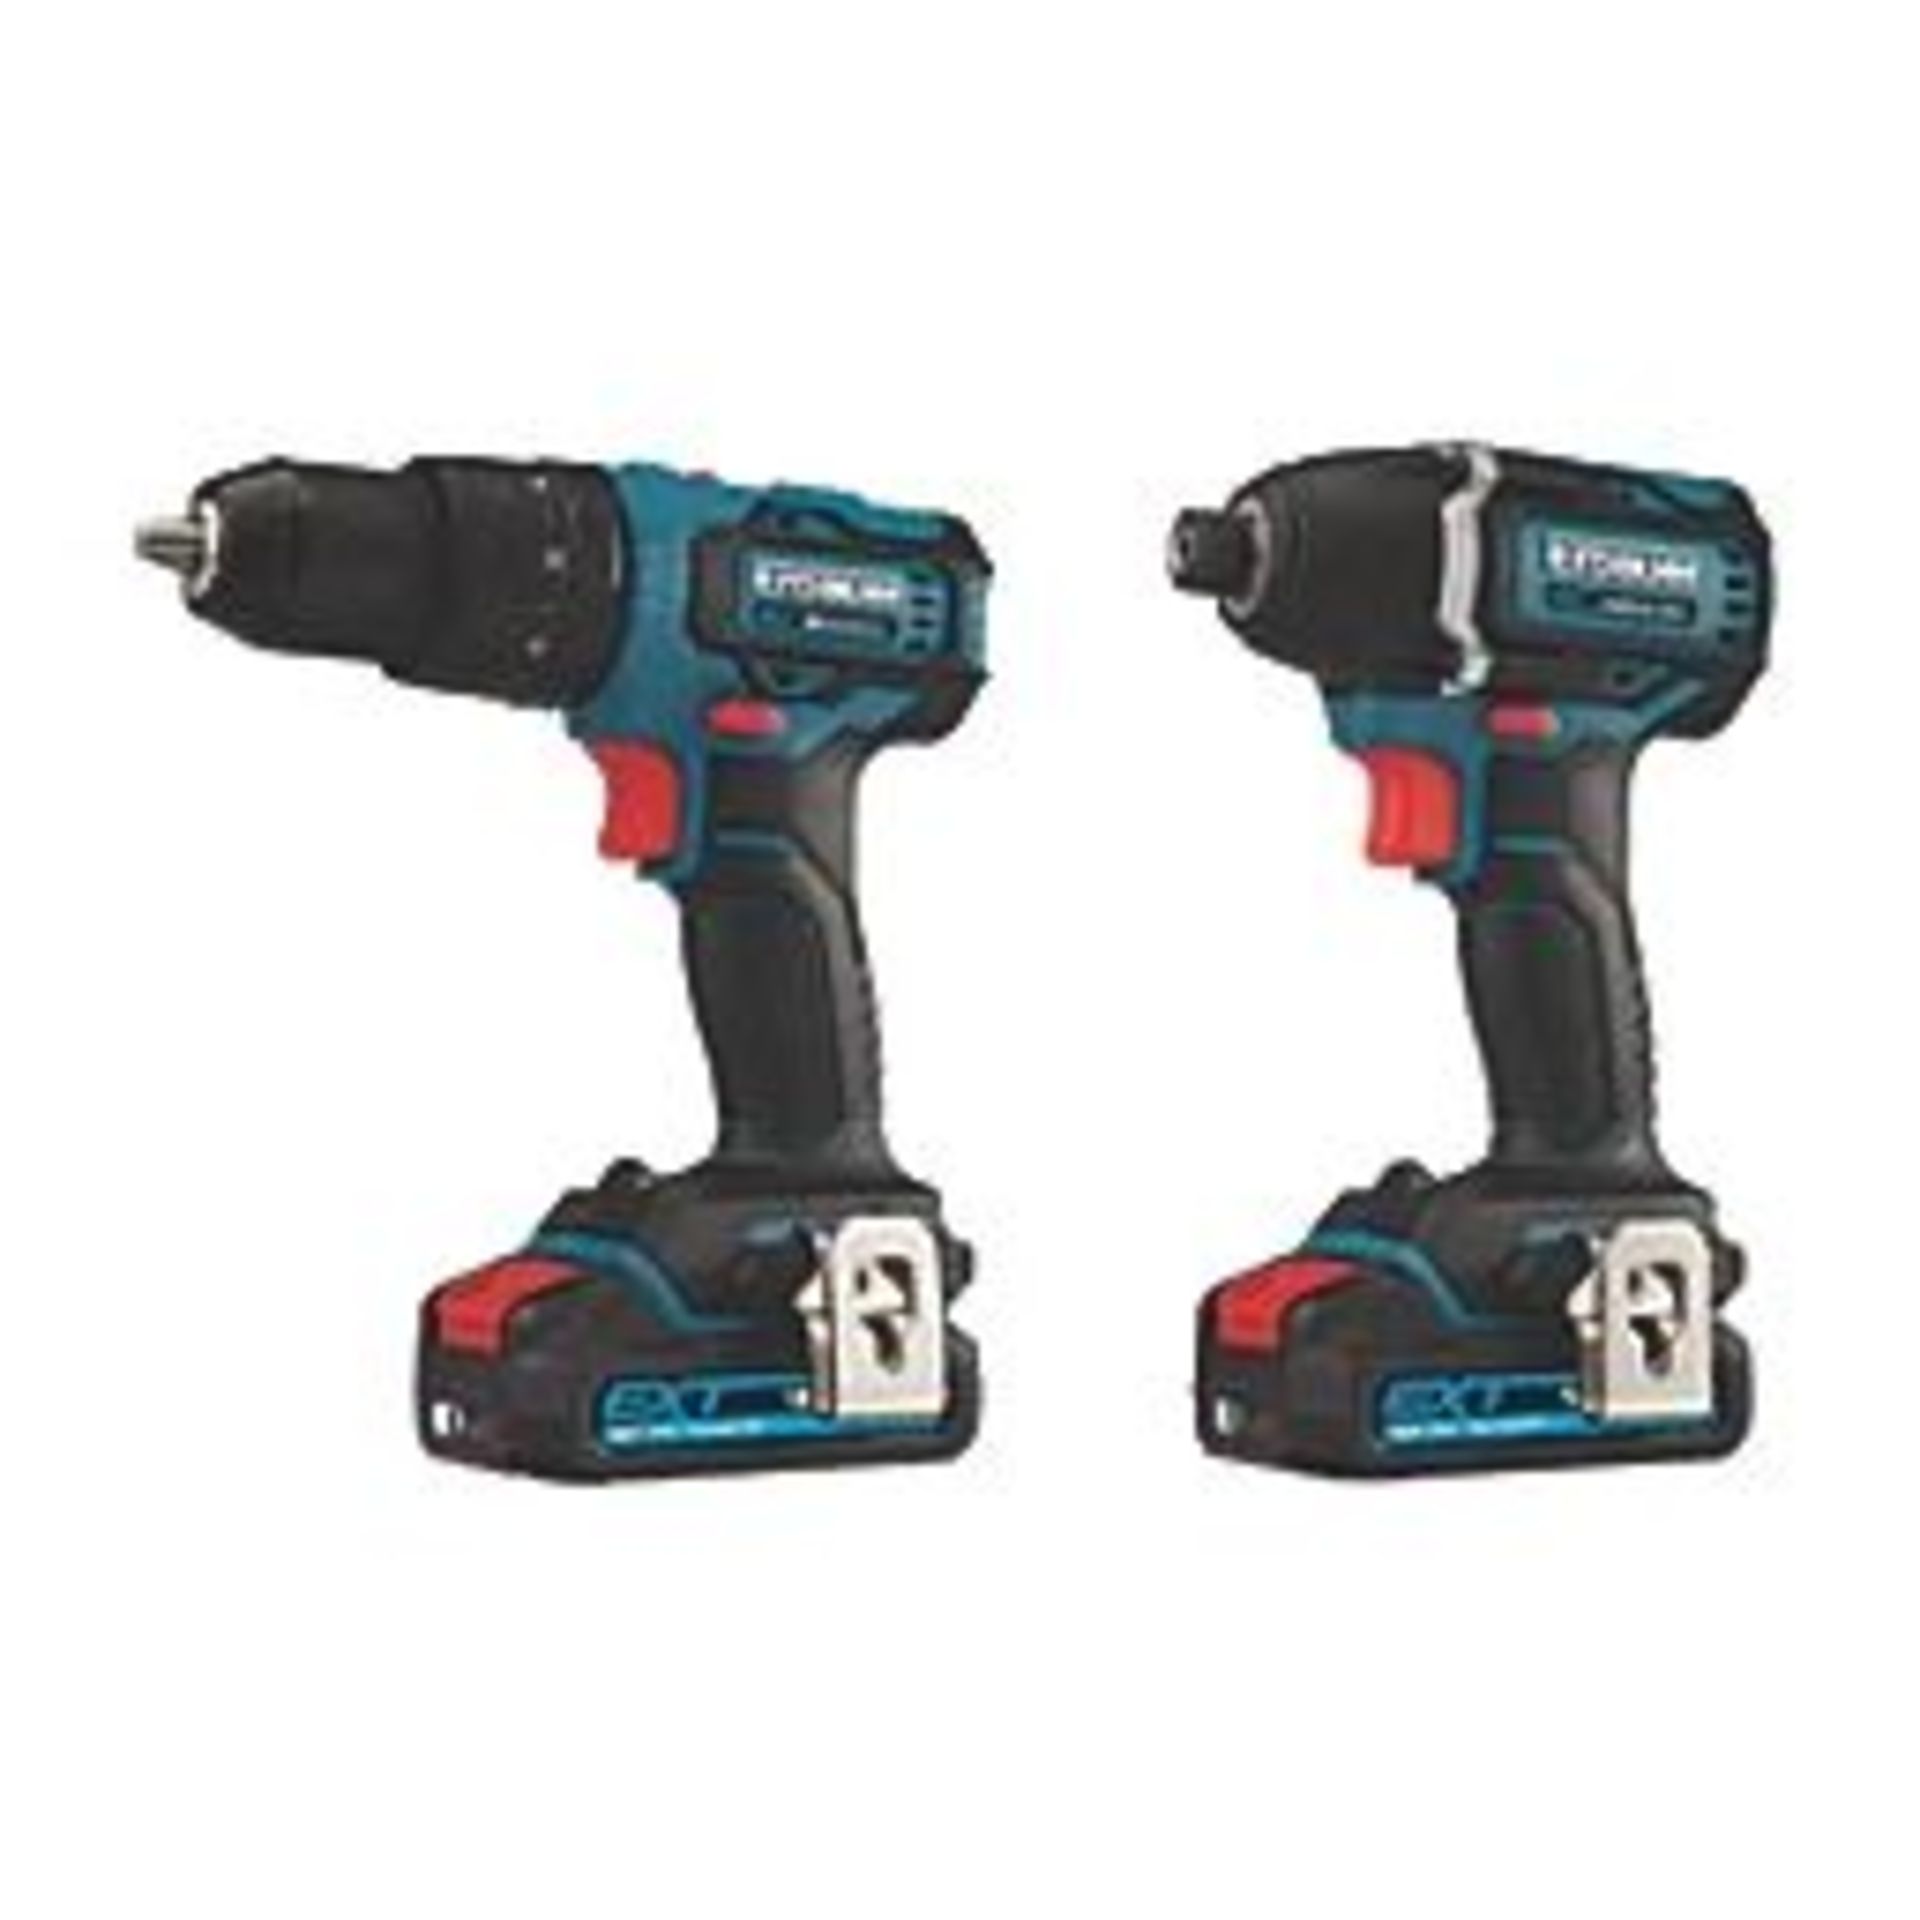 ERBAUER 18V 2 X 2.0AH LI-ION EXT BRUSHLESS CORDLESS TWIN PACK. - R14.15. 3-in-1 multi-function combi